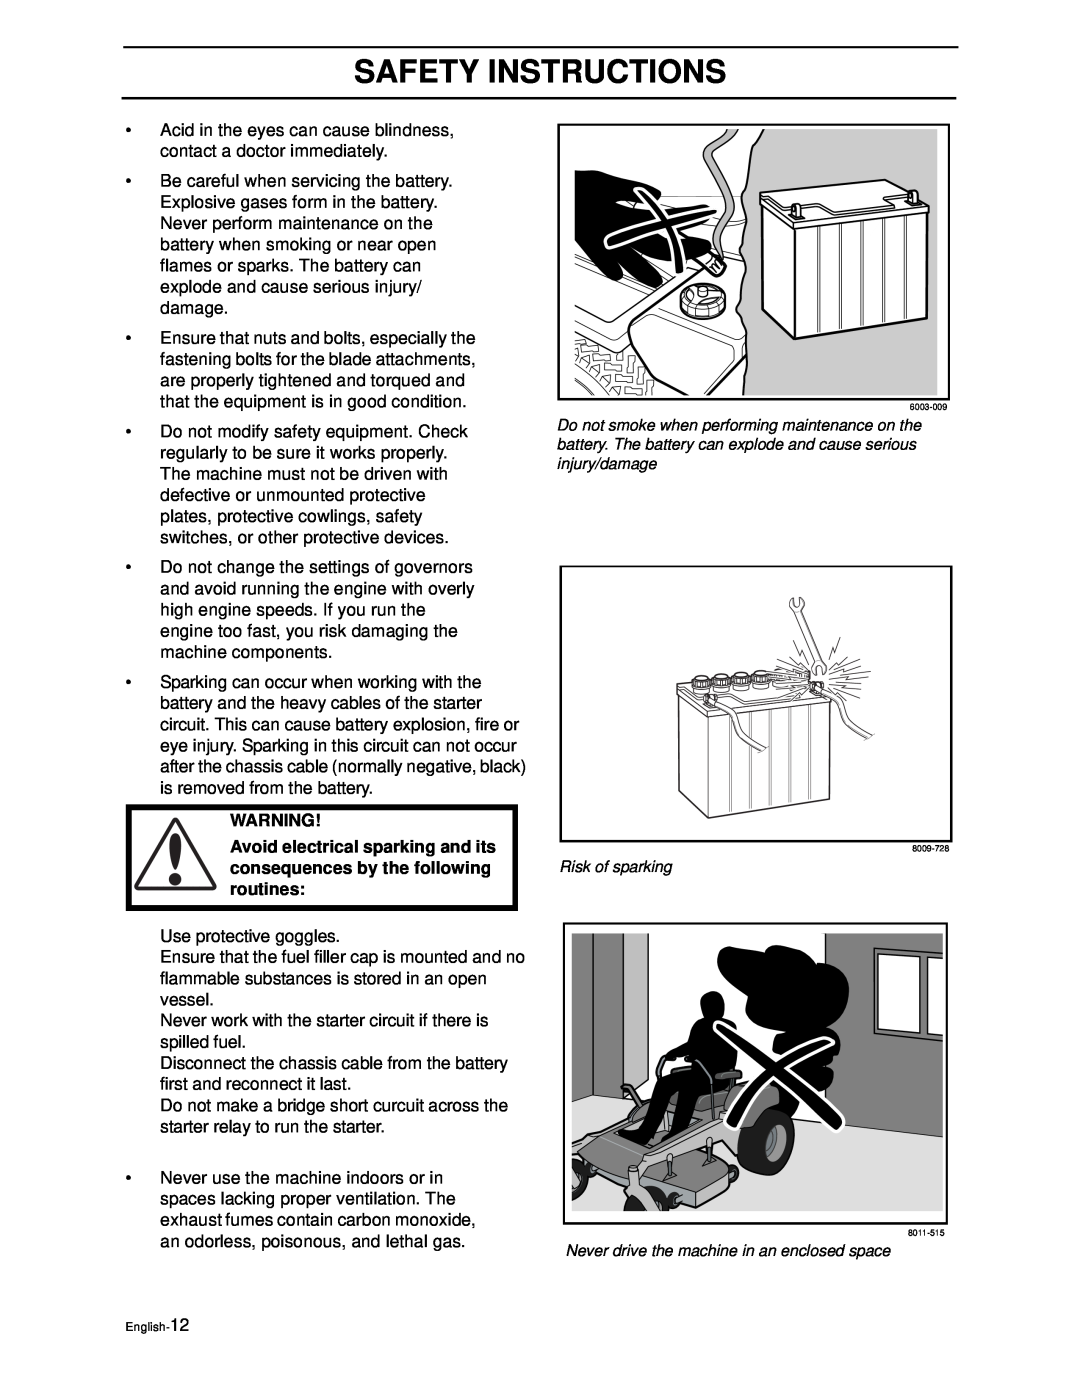 Husqvarna LZ5225TKAA, LZ6123TLKOA, LZ6125TKAA, LZ6127TKOA, LZ7227TKOA manual Safety Instructions, Use protective goggles 